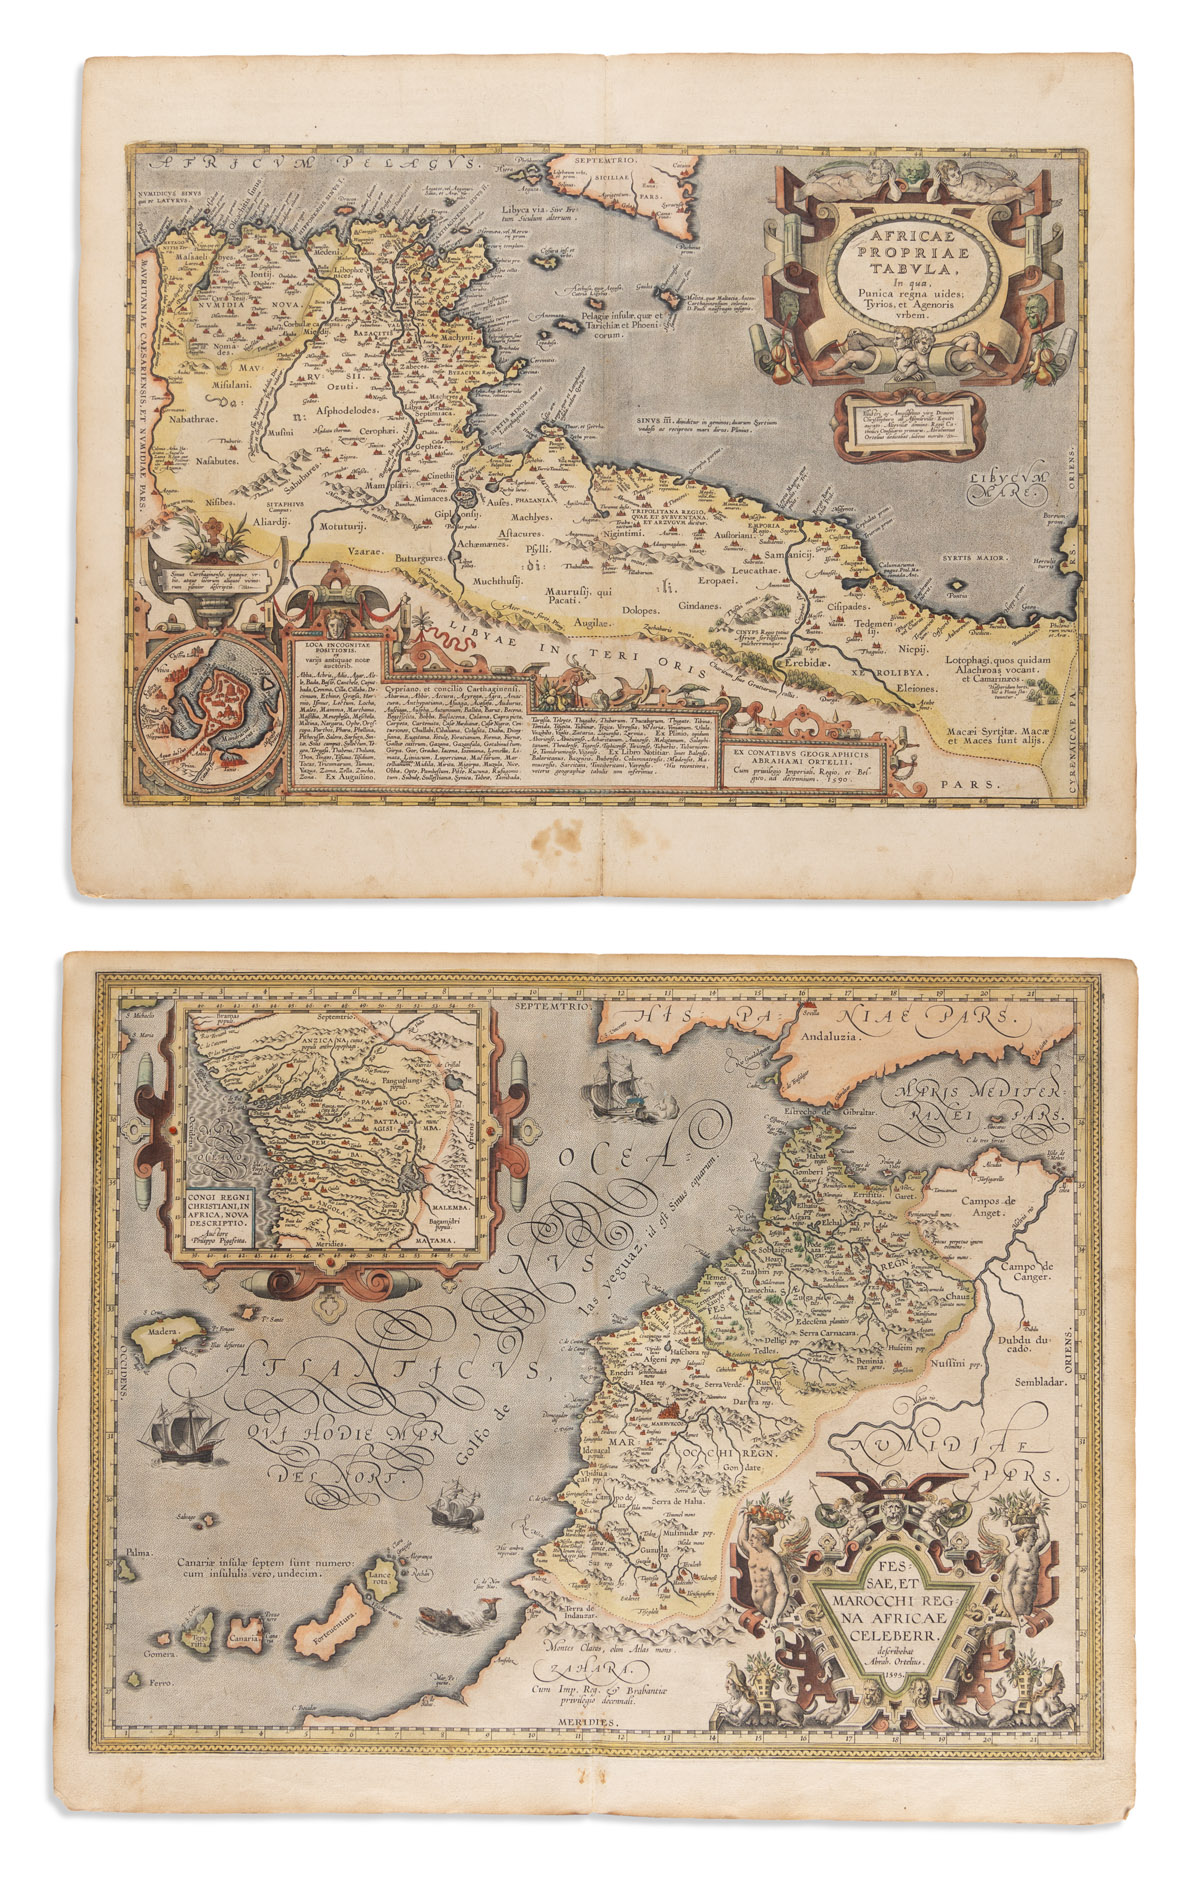 (AFRICA.) Abraham Ortelius. Two double-page engraved maps of northern Africa in original hand-color.